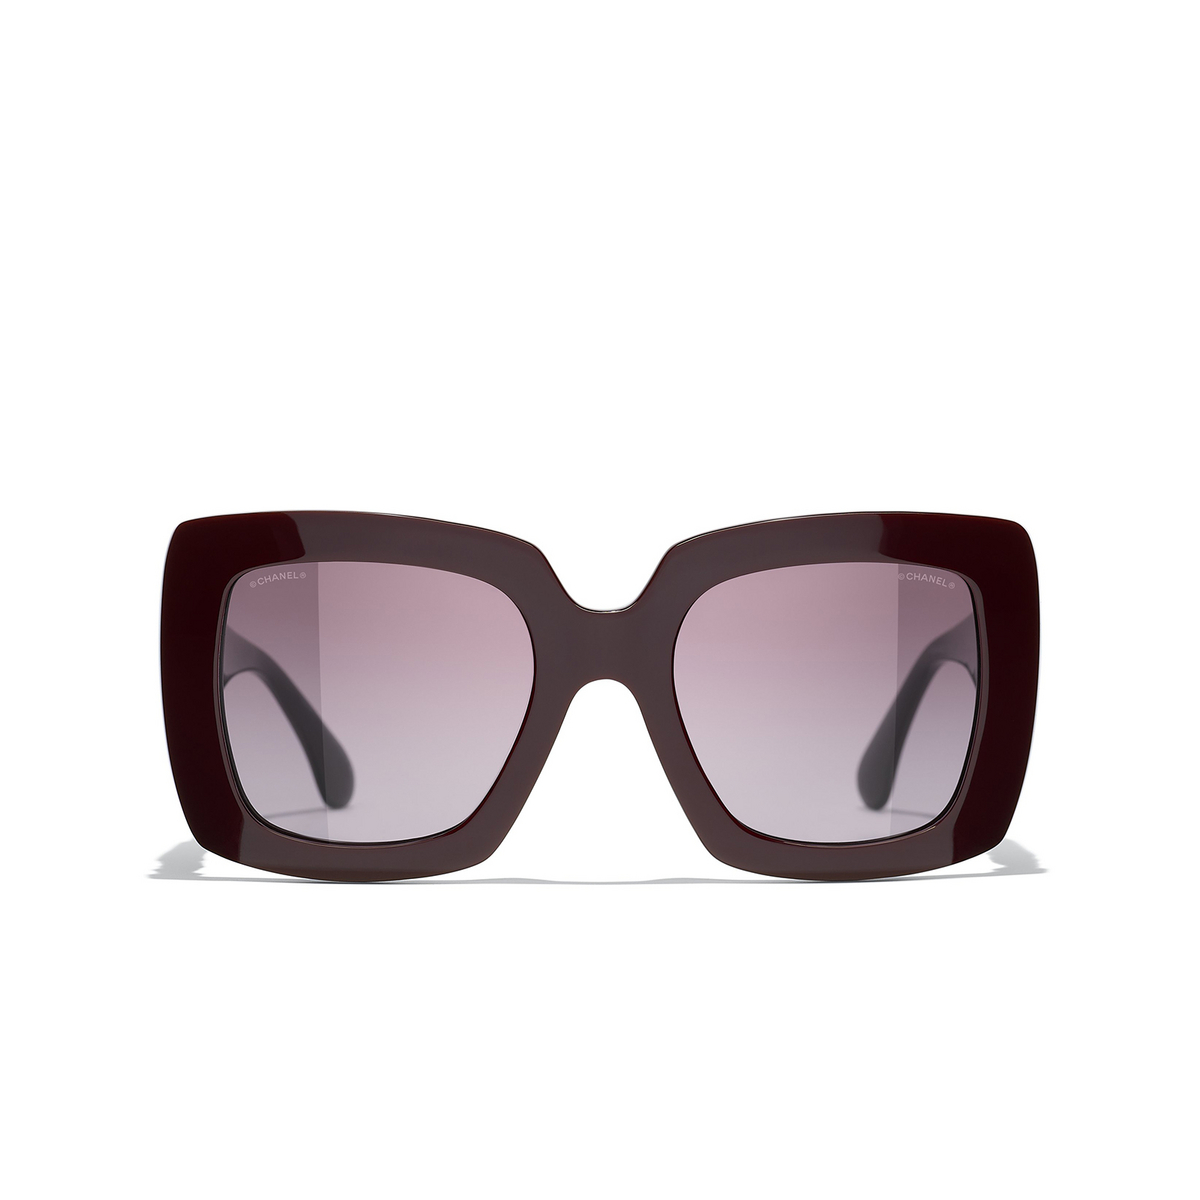 CHANEL square Sunglasses 1461S1 Burgundy - front view